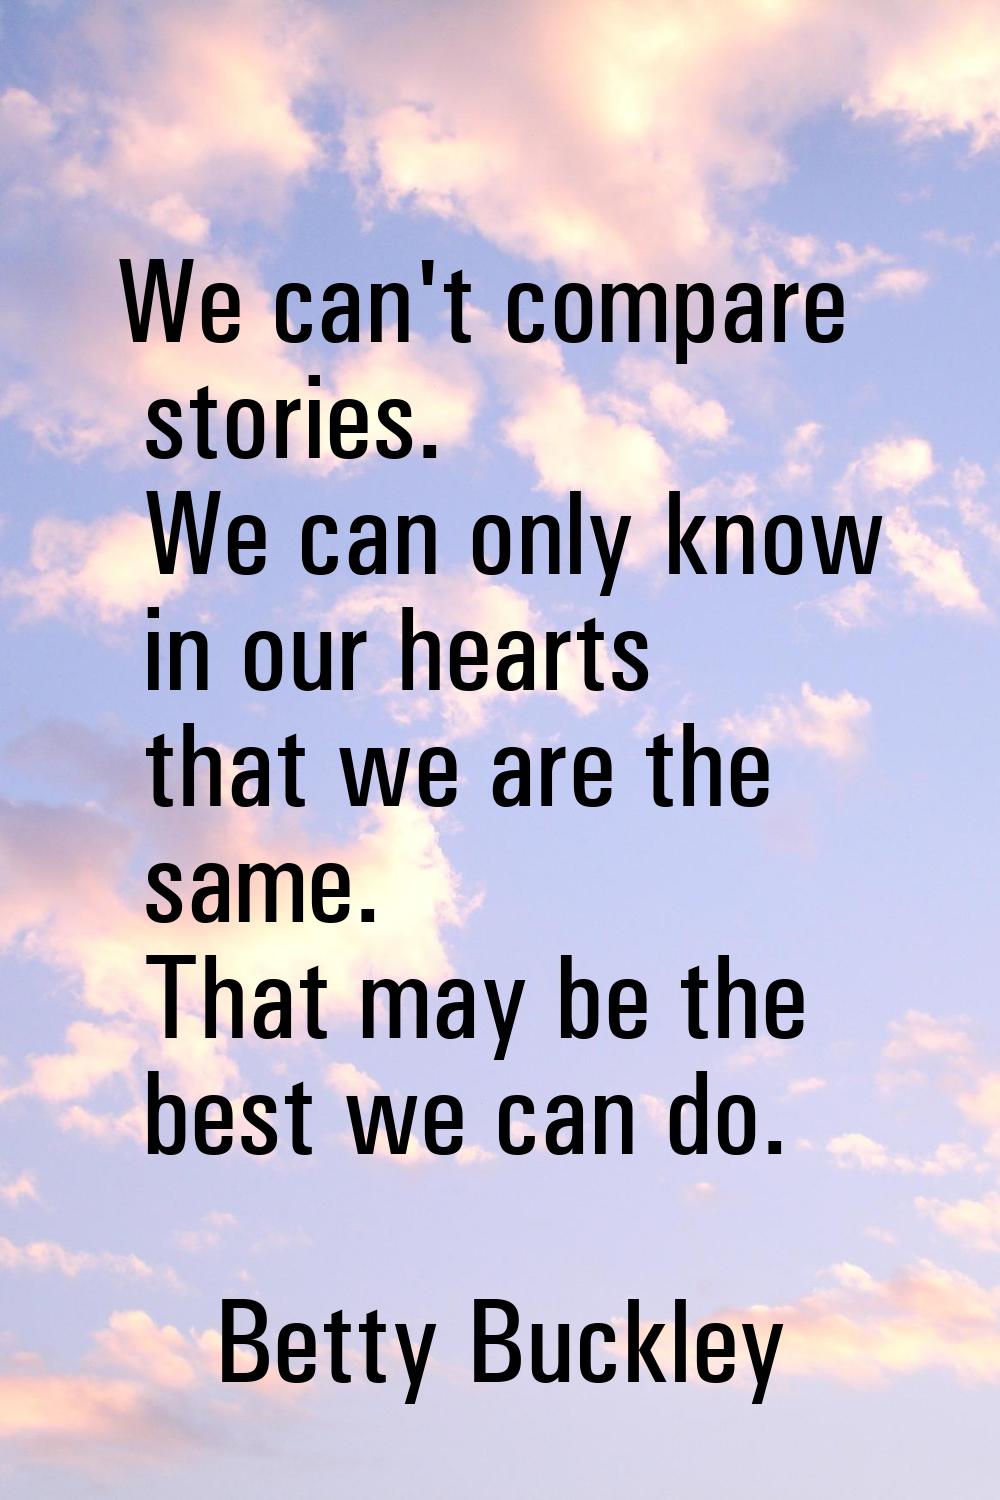 We can't compare stories. We can only know in our hearts that we are the same. That may be the best